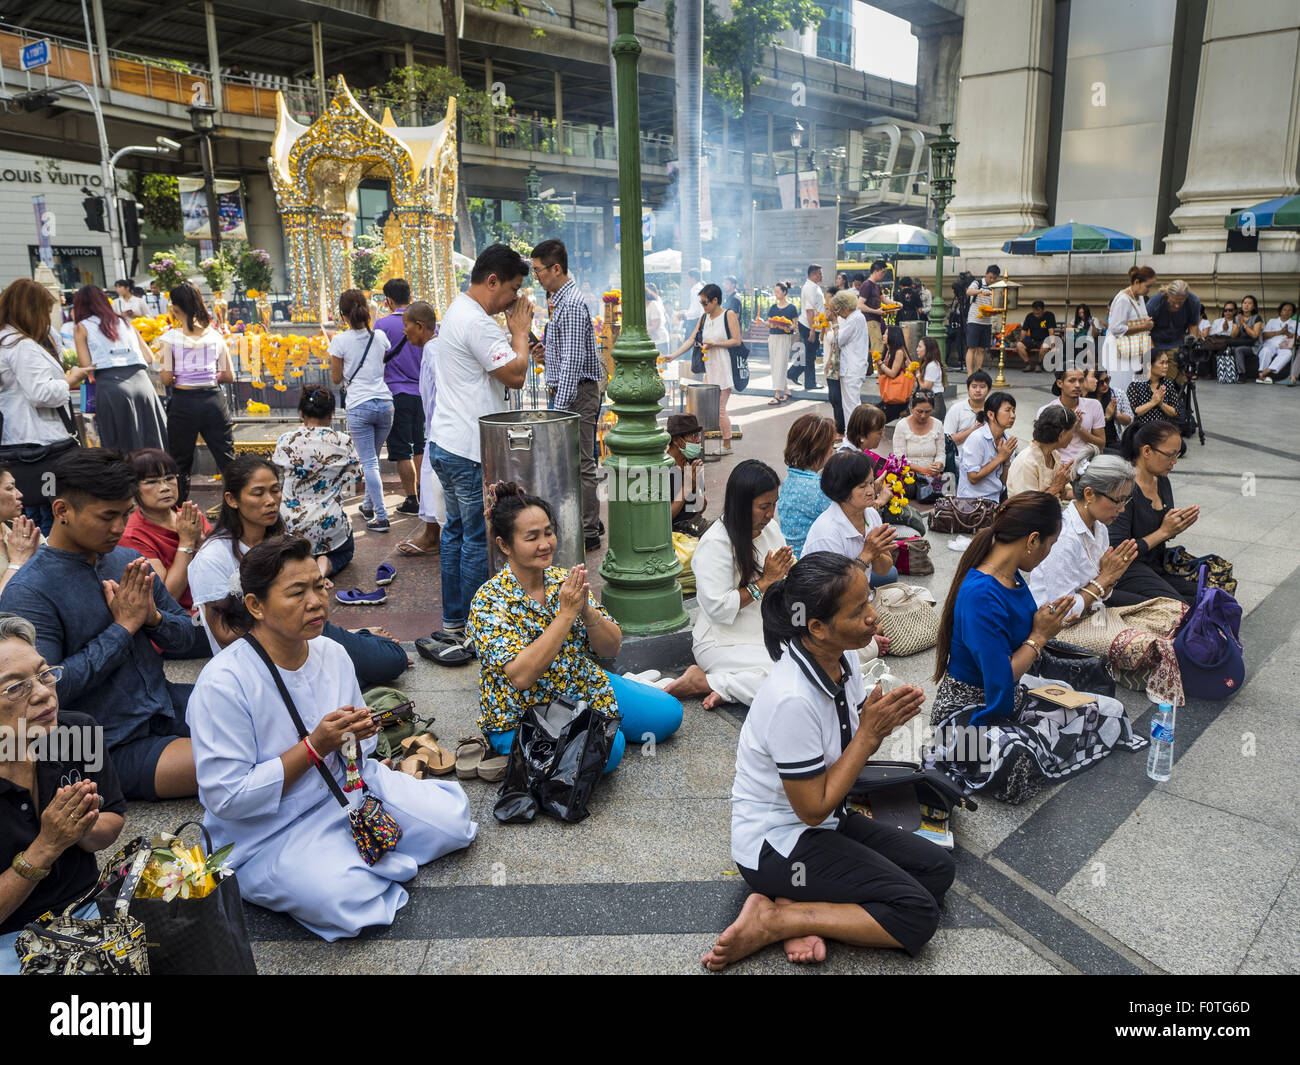 Bangkok, Thailand. 21st Aug, 2015. People gather on the plaza at Erawan Shrine for a Mahayana Buddhist ceremony to restore the shrine after the bombing. The Bangkok Metropolitan Administration (BMA) held a religious ceremony Friday for the Ratchaprasong bomb victims. The ceremony started with a Brahmin blessing at Erawan Shrine, which was the target of a bombing Monday night. After the blessing people went across the street to the plaza in front of Central World mall for an interfaith religious service. Credit:  ZUMA Press, Inc./Alamy Live News Stock Photo